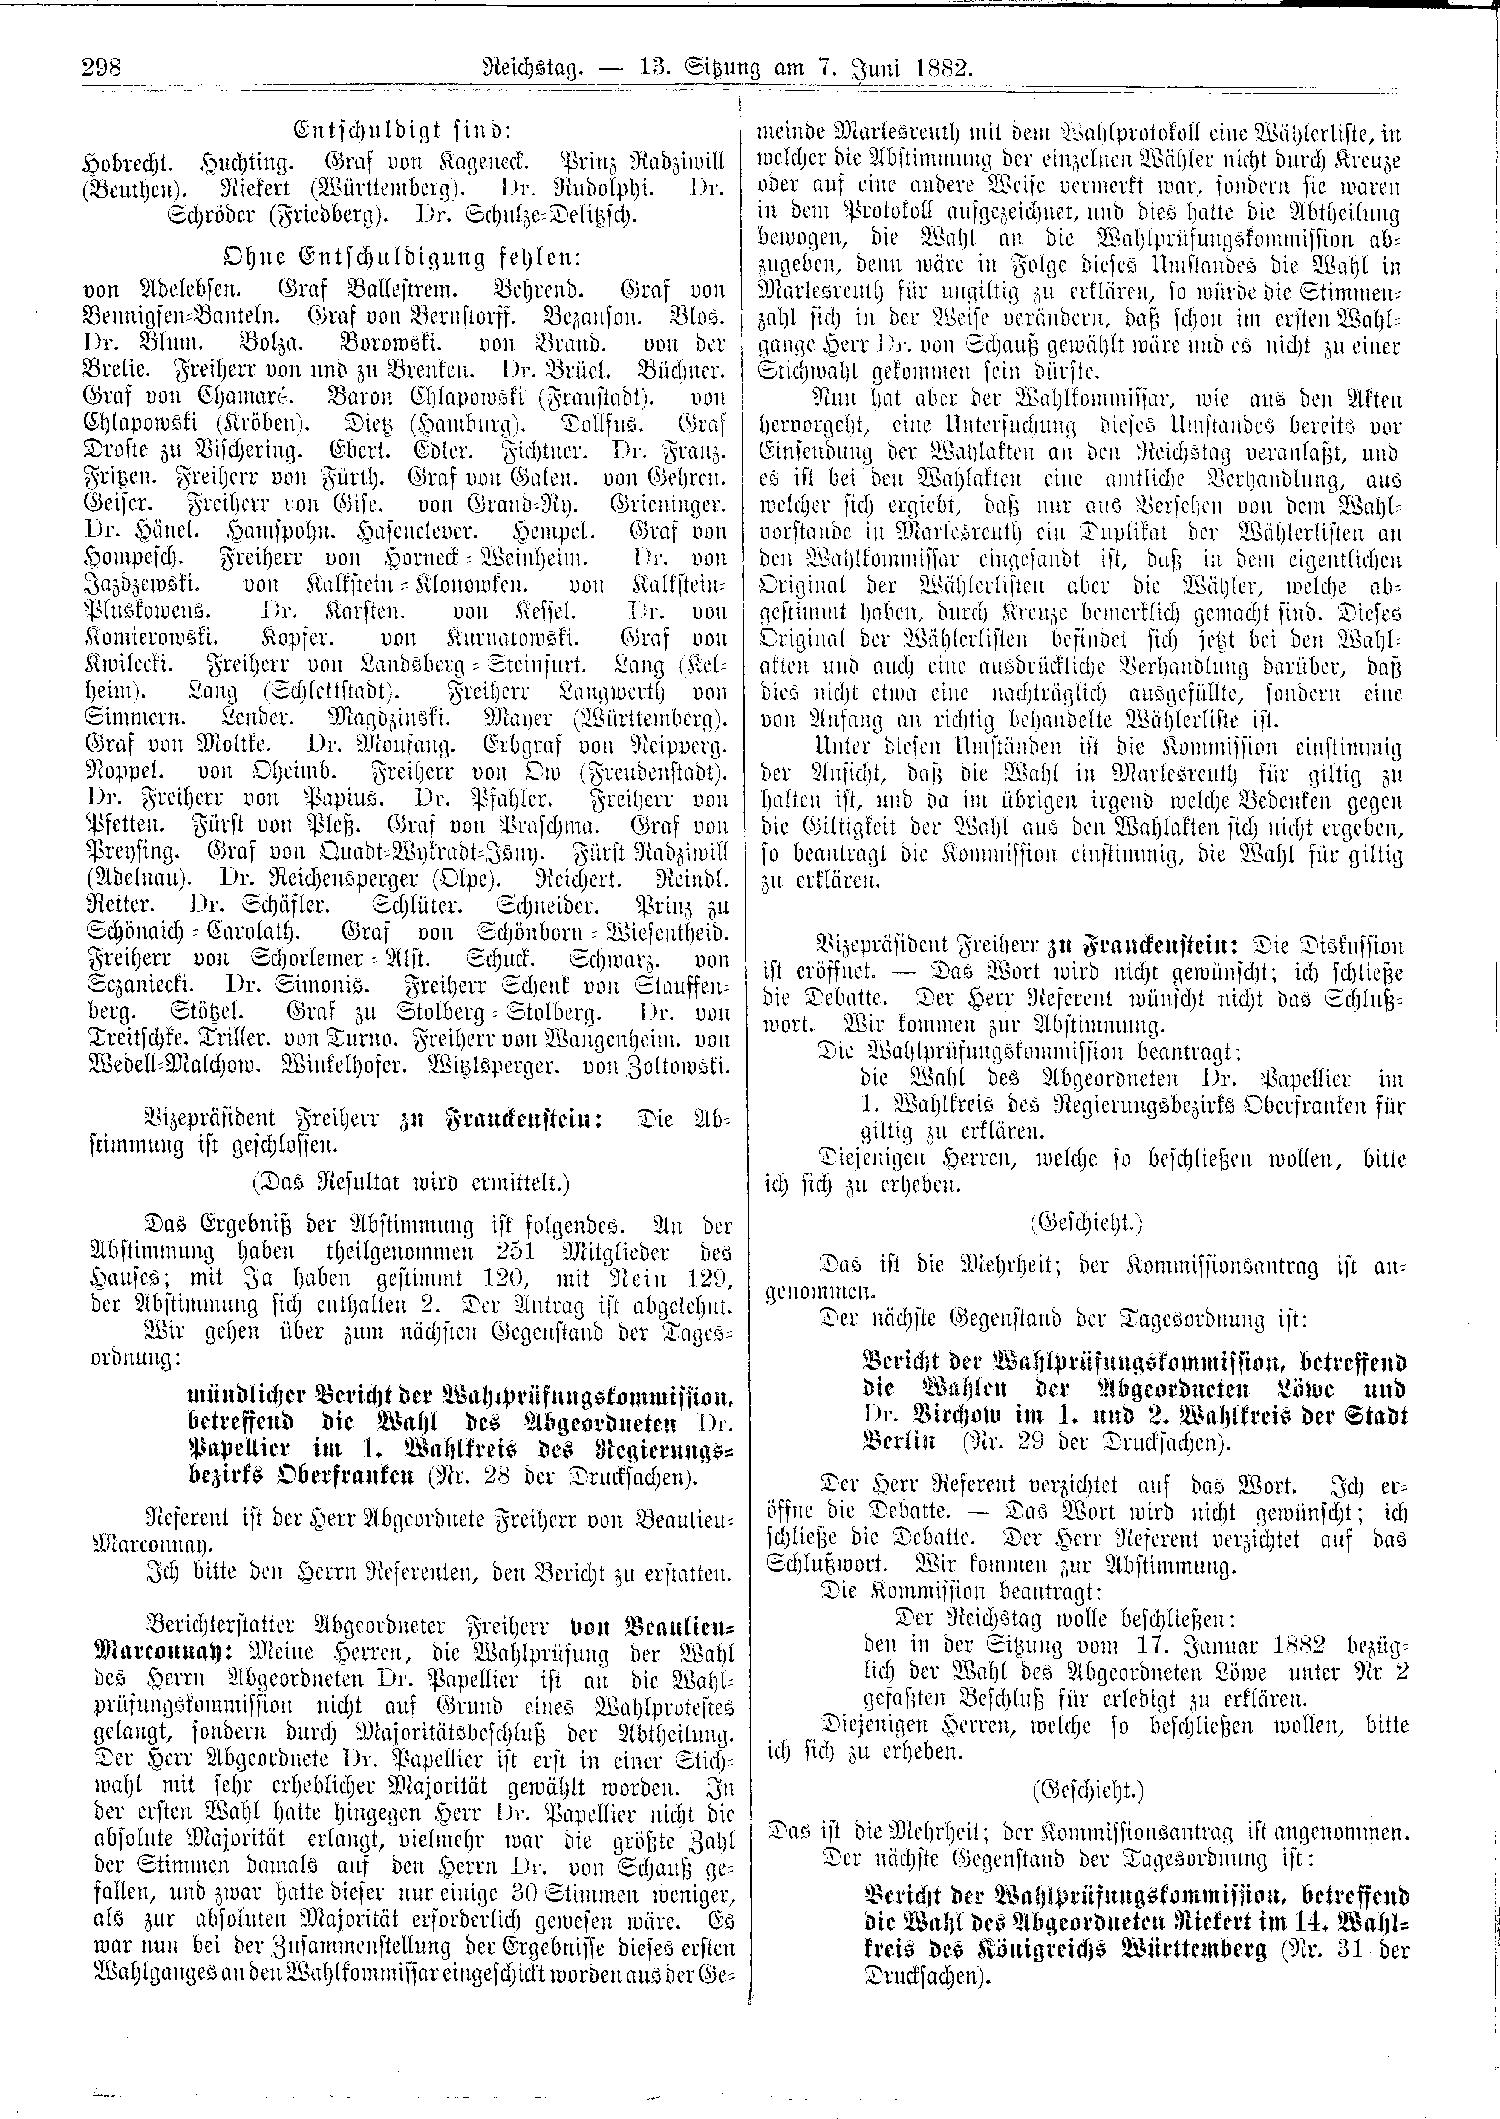 Scan of page 298